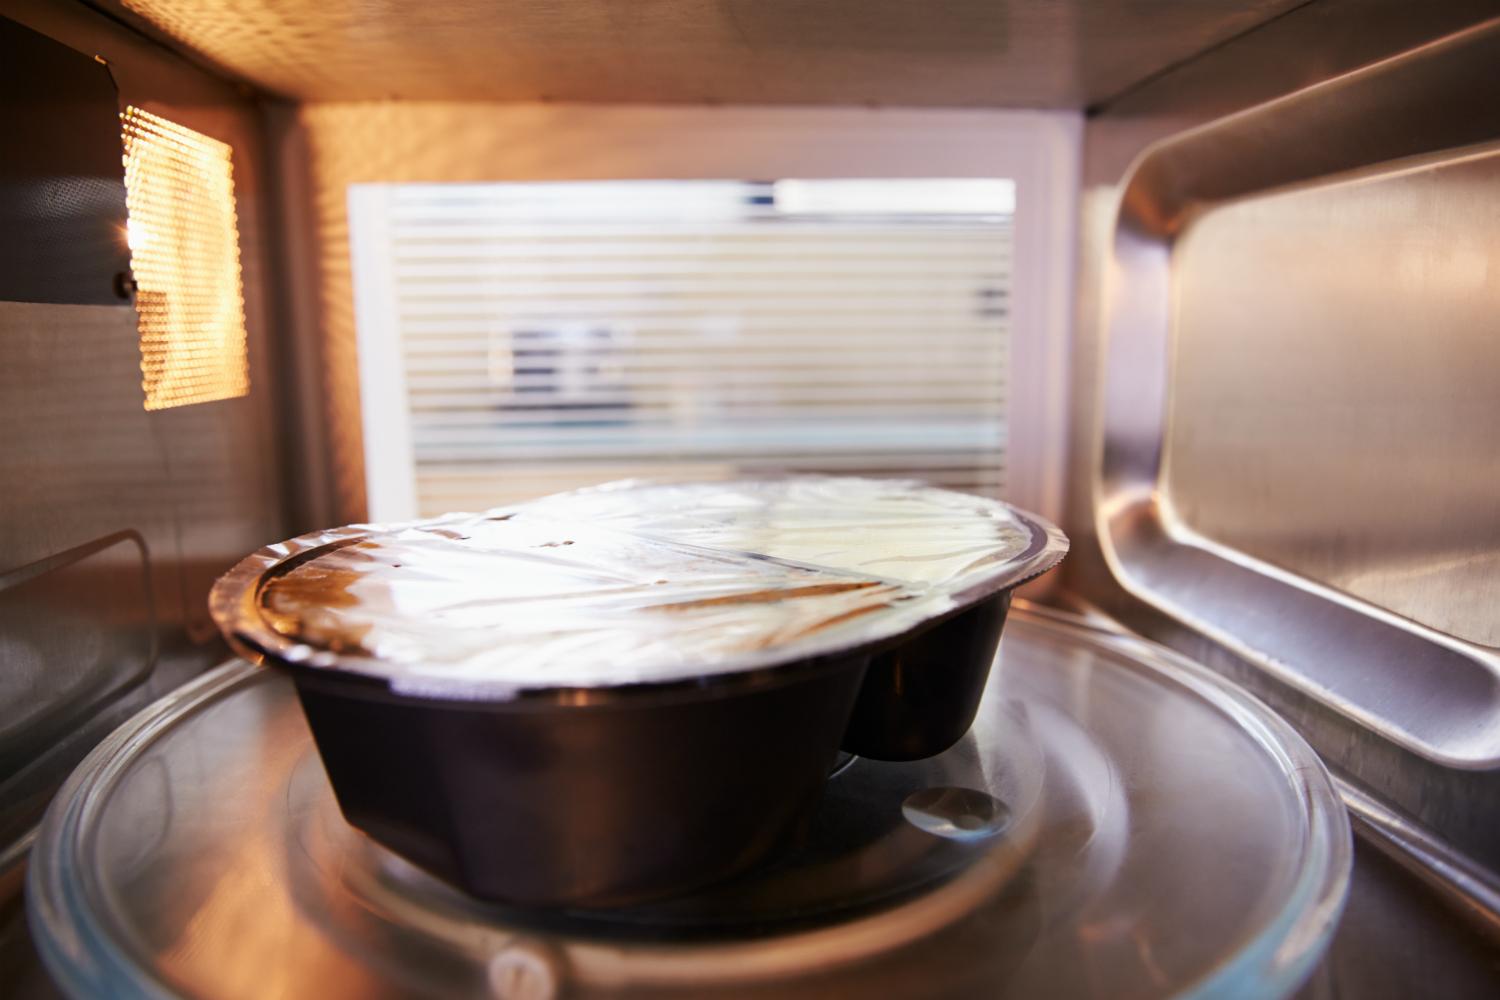 is it safe to heat up plastic in the microwave meal container